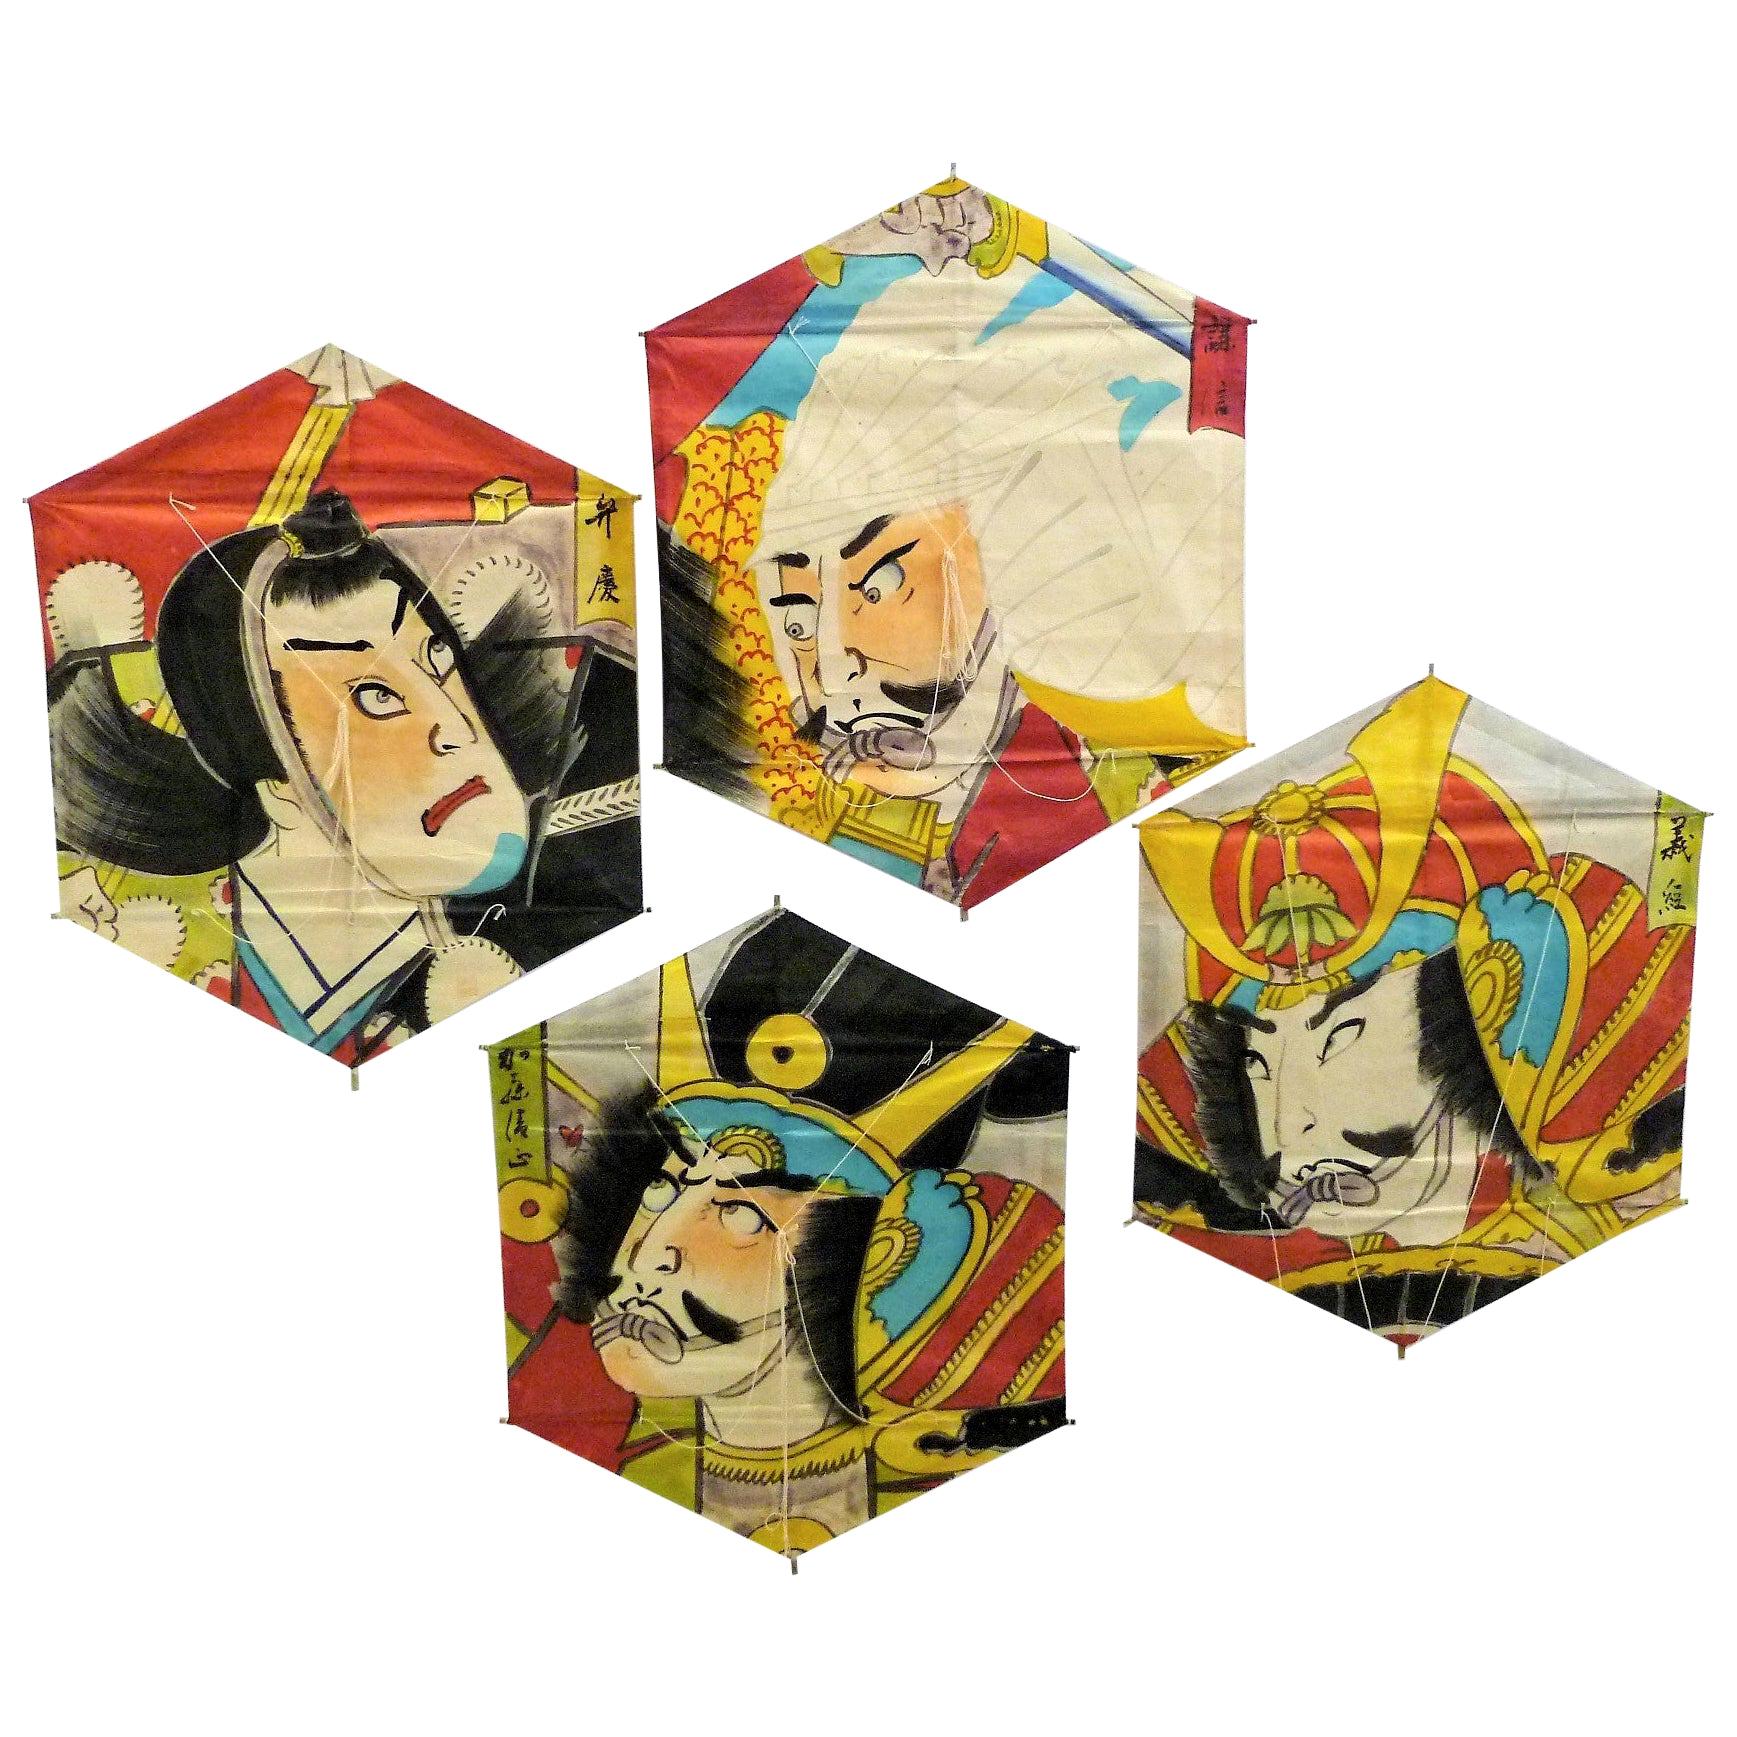 Set of 4 Vintage Hand Painted Japanese Kites Warlord Depictions, 1970s